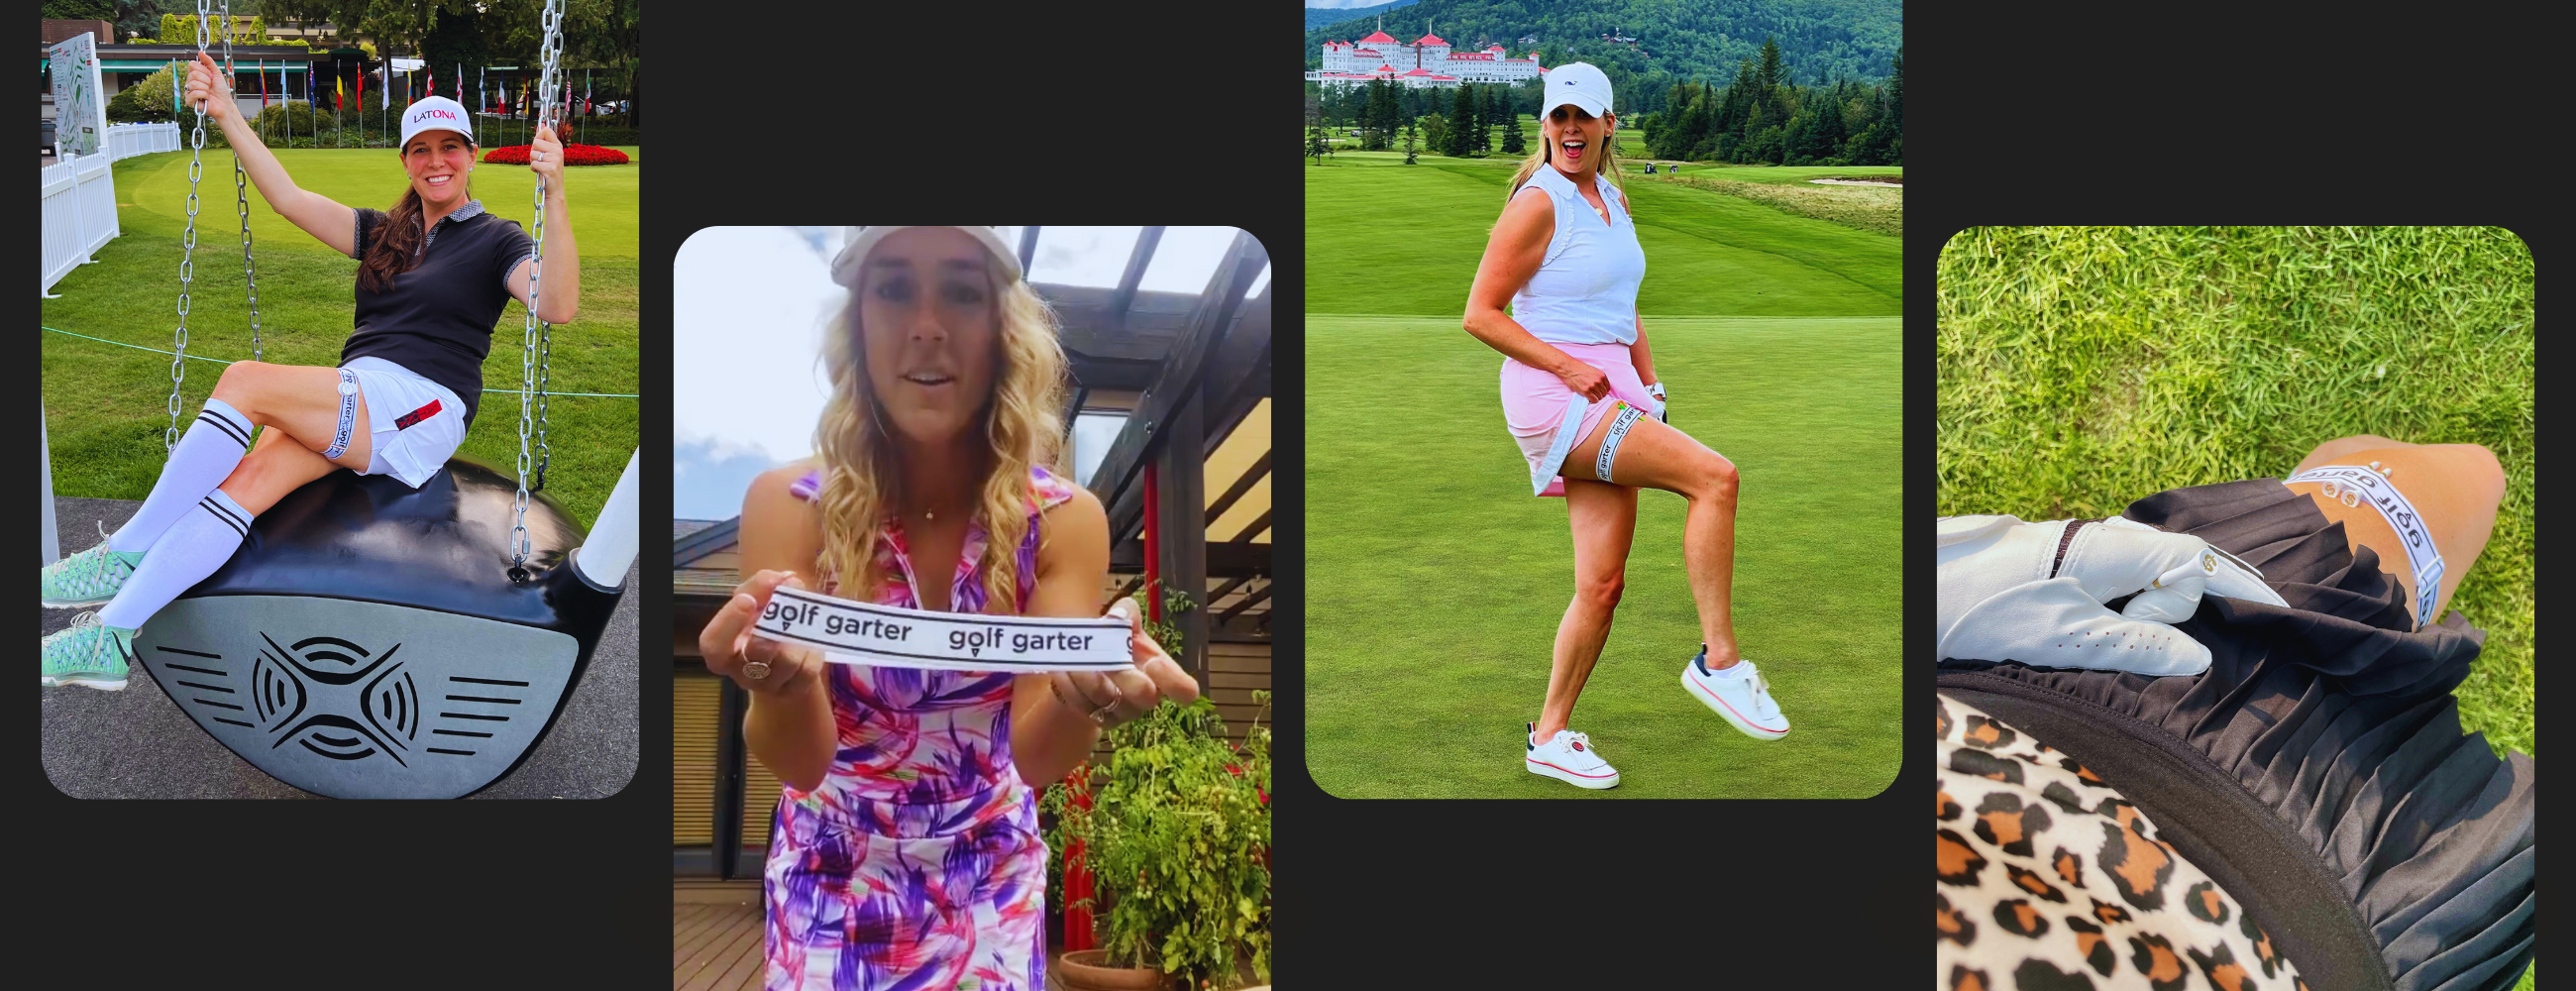 This is a collage of different female golfers out on the course with their Golf Garters visible.